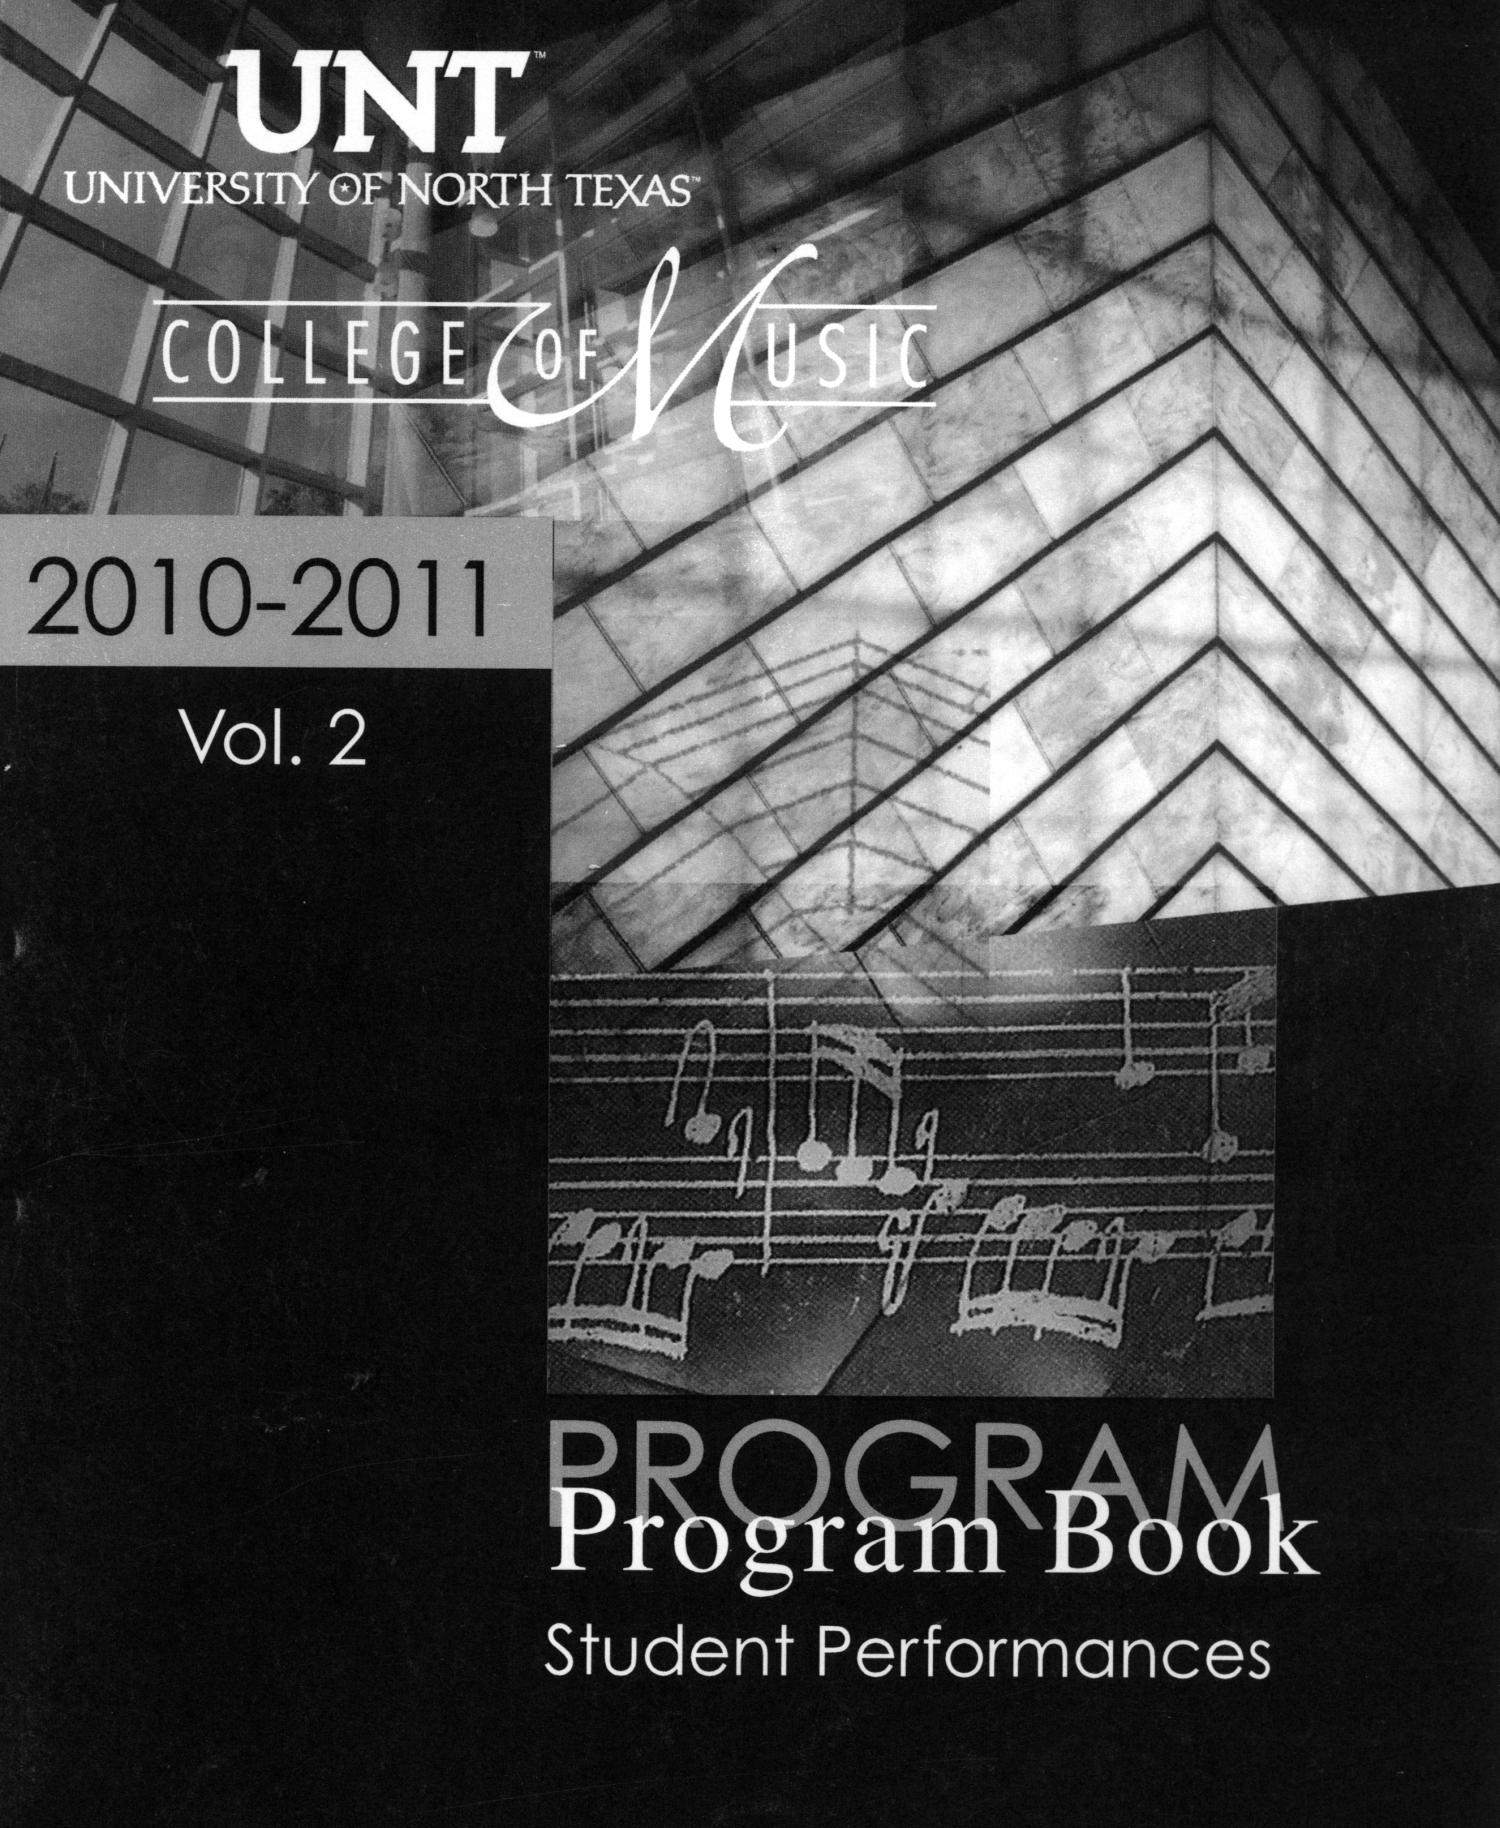 College of Music Program Book 2010-2011: Student Performances, Volume 2
                                                
                                                    Front Cover
                                                